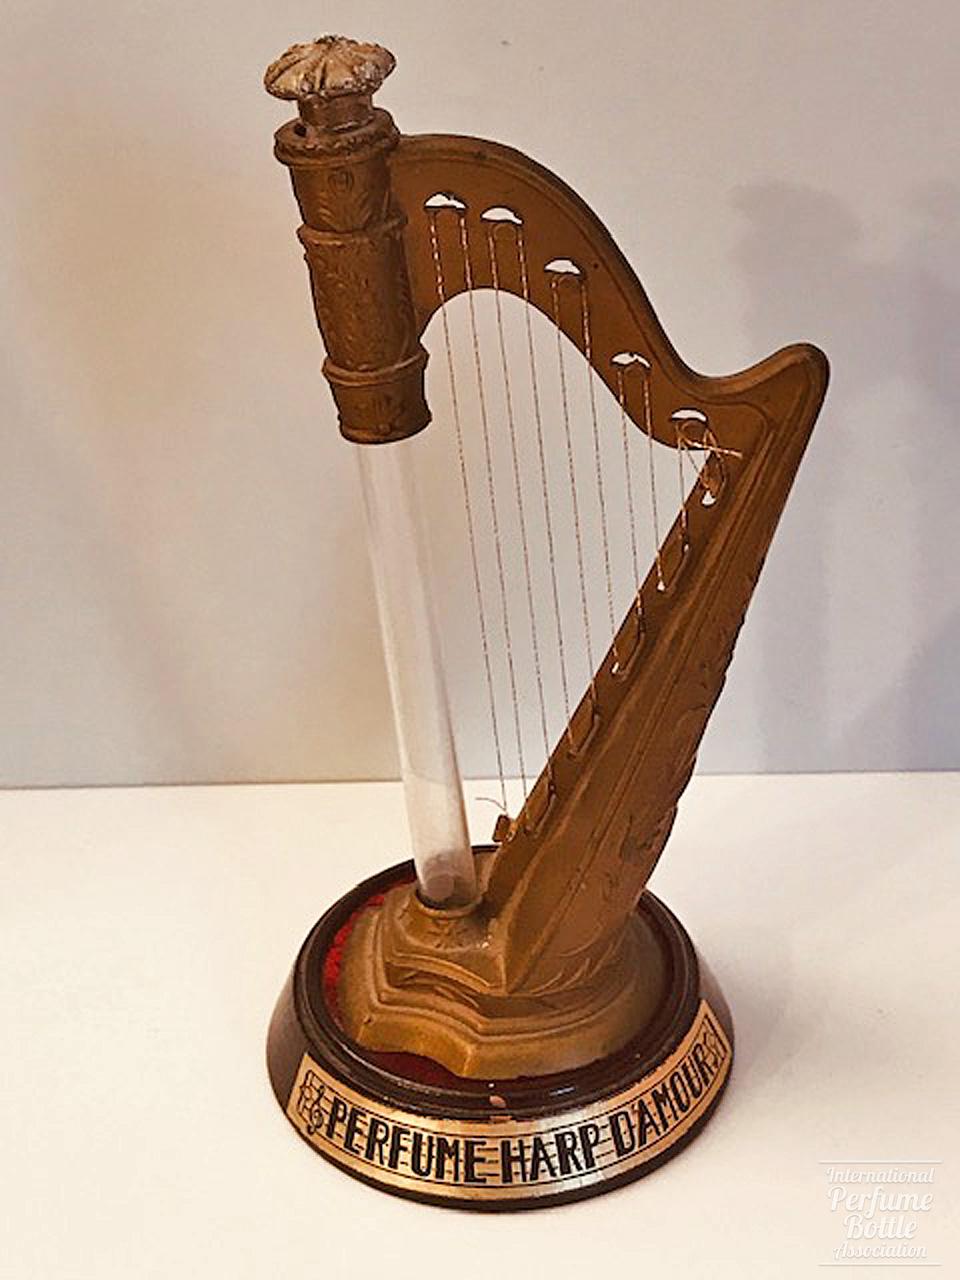 "Perfume Harp d'Amour" by Cleveland Corp.